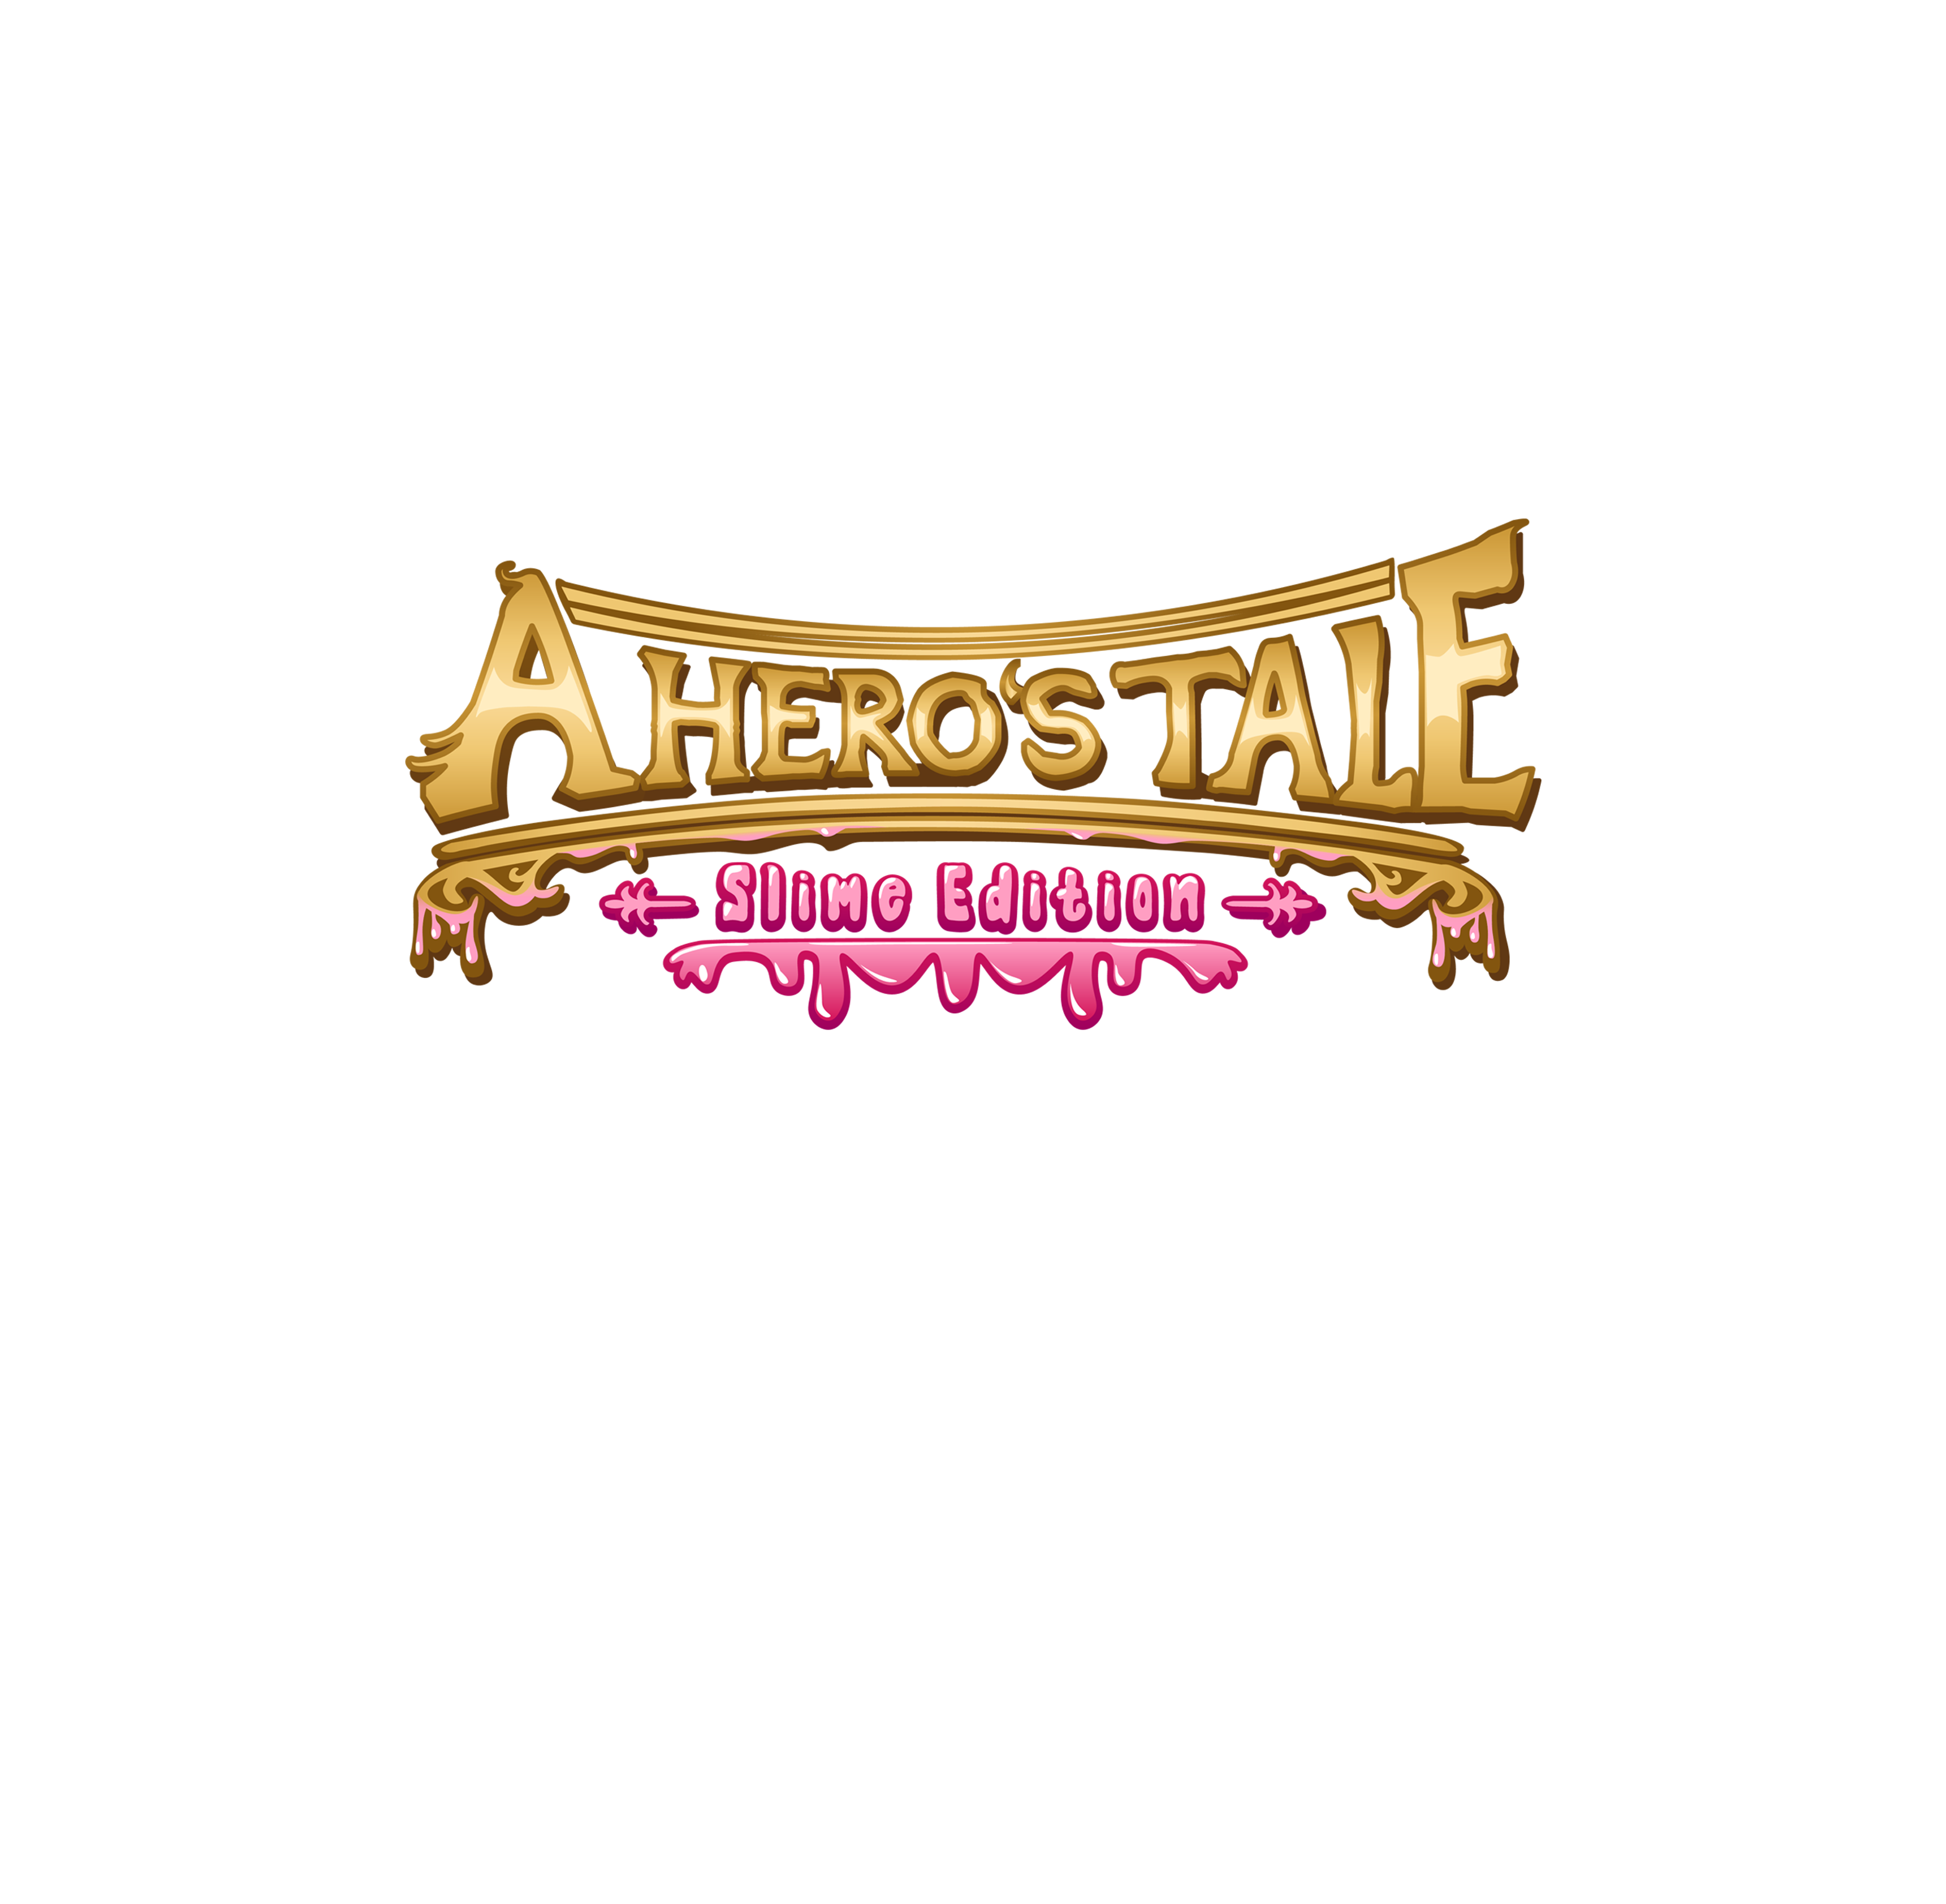 A Hero's Tale: Slime Edition